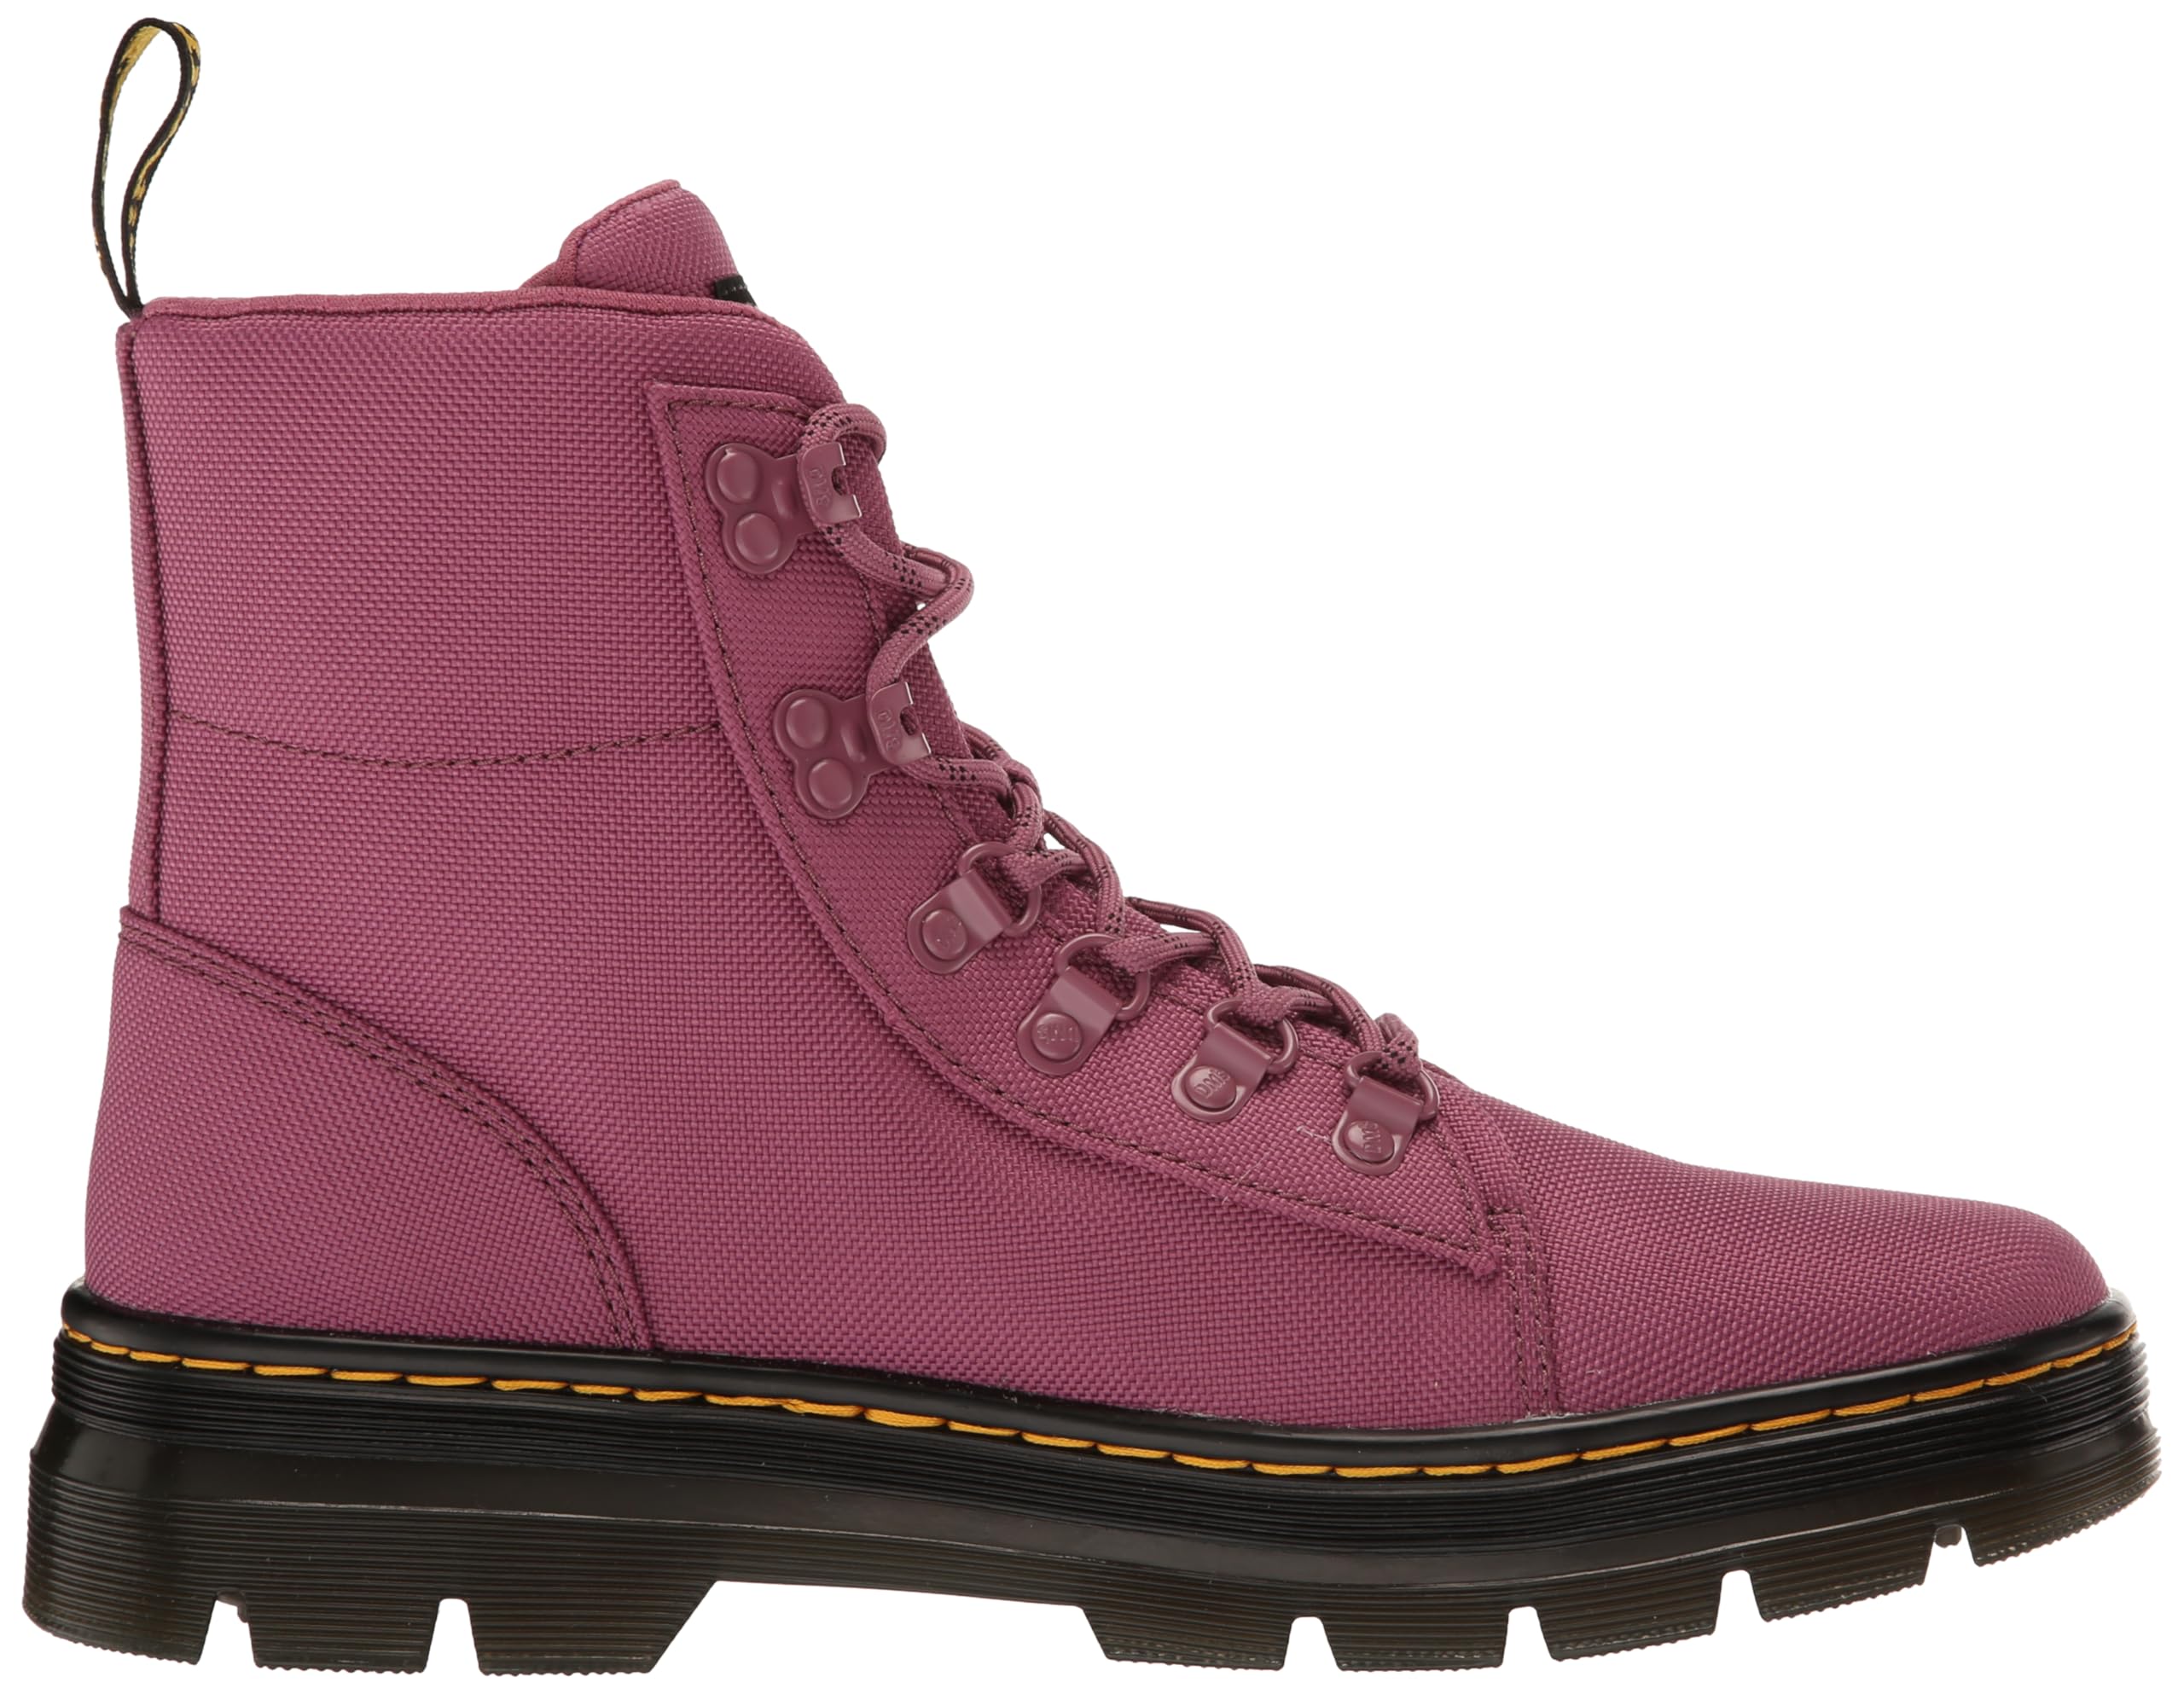 Dr. Martens Women's Combs W Fashion Boot